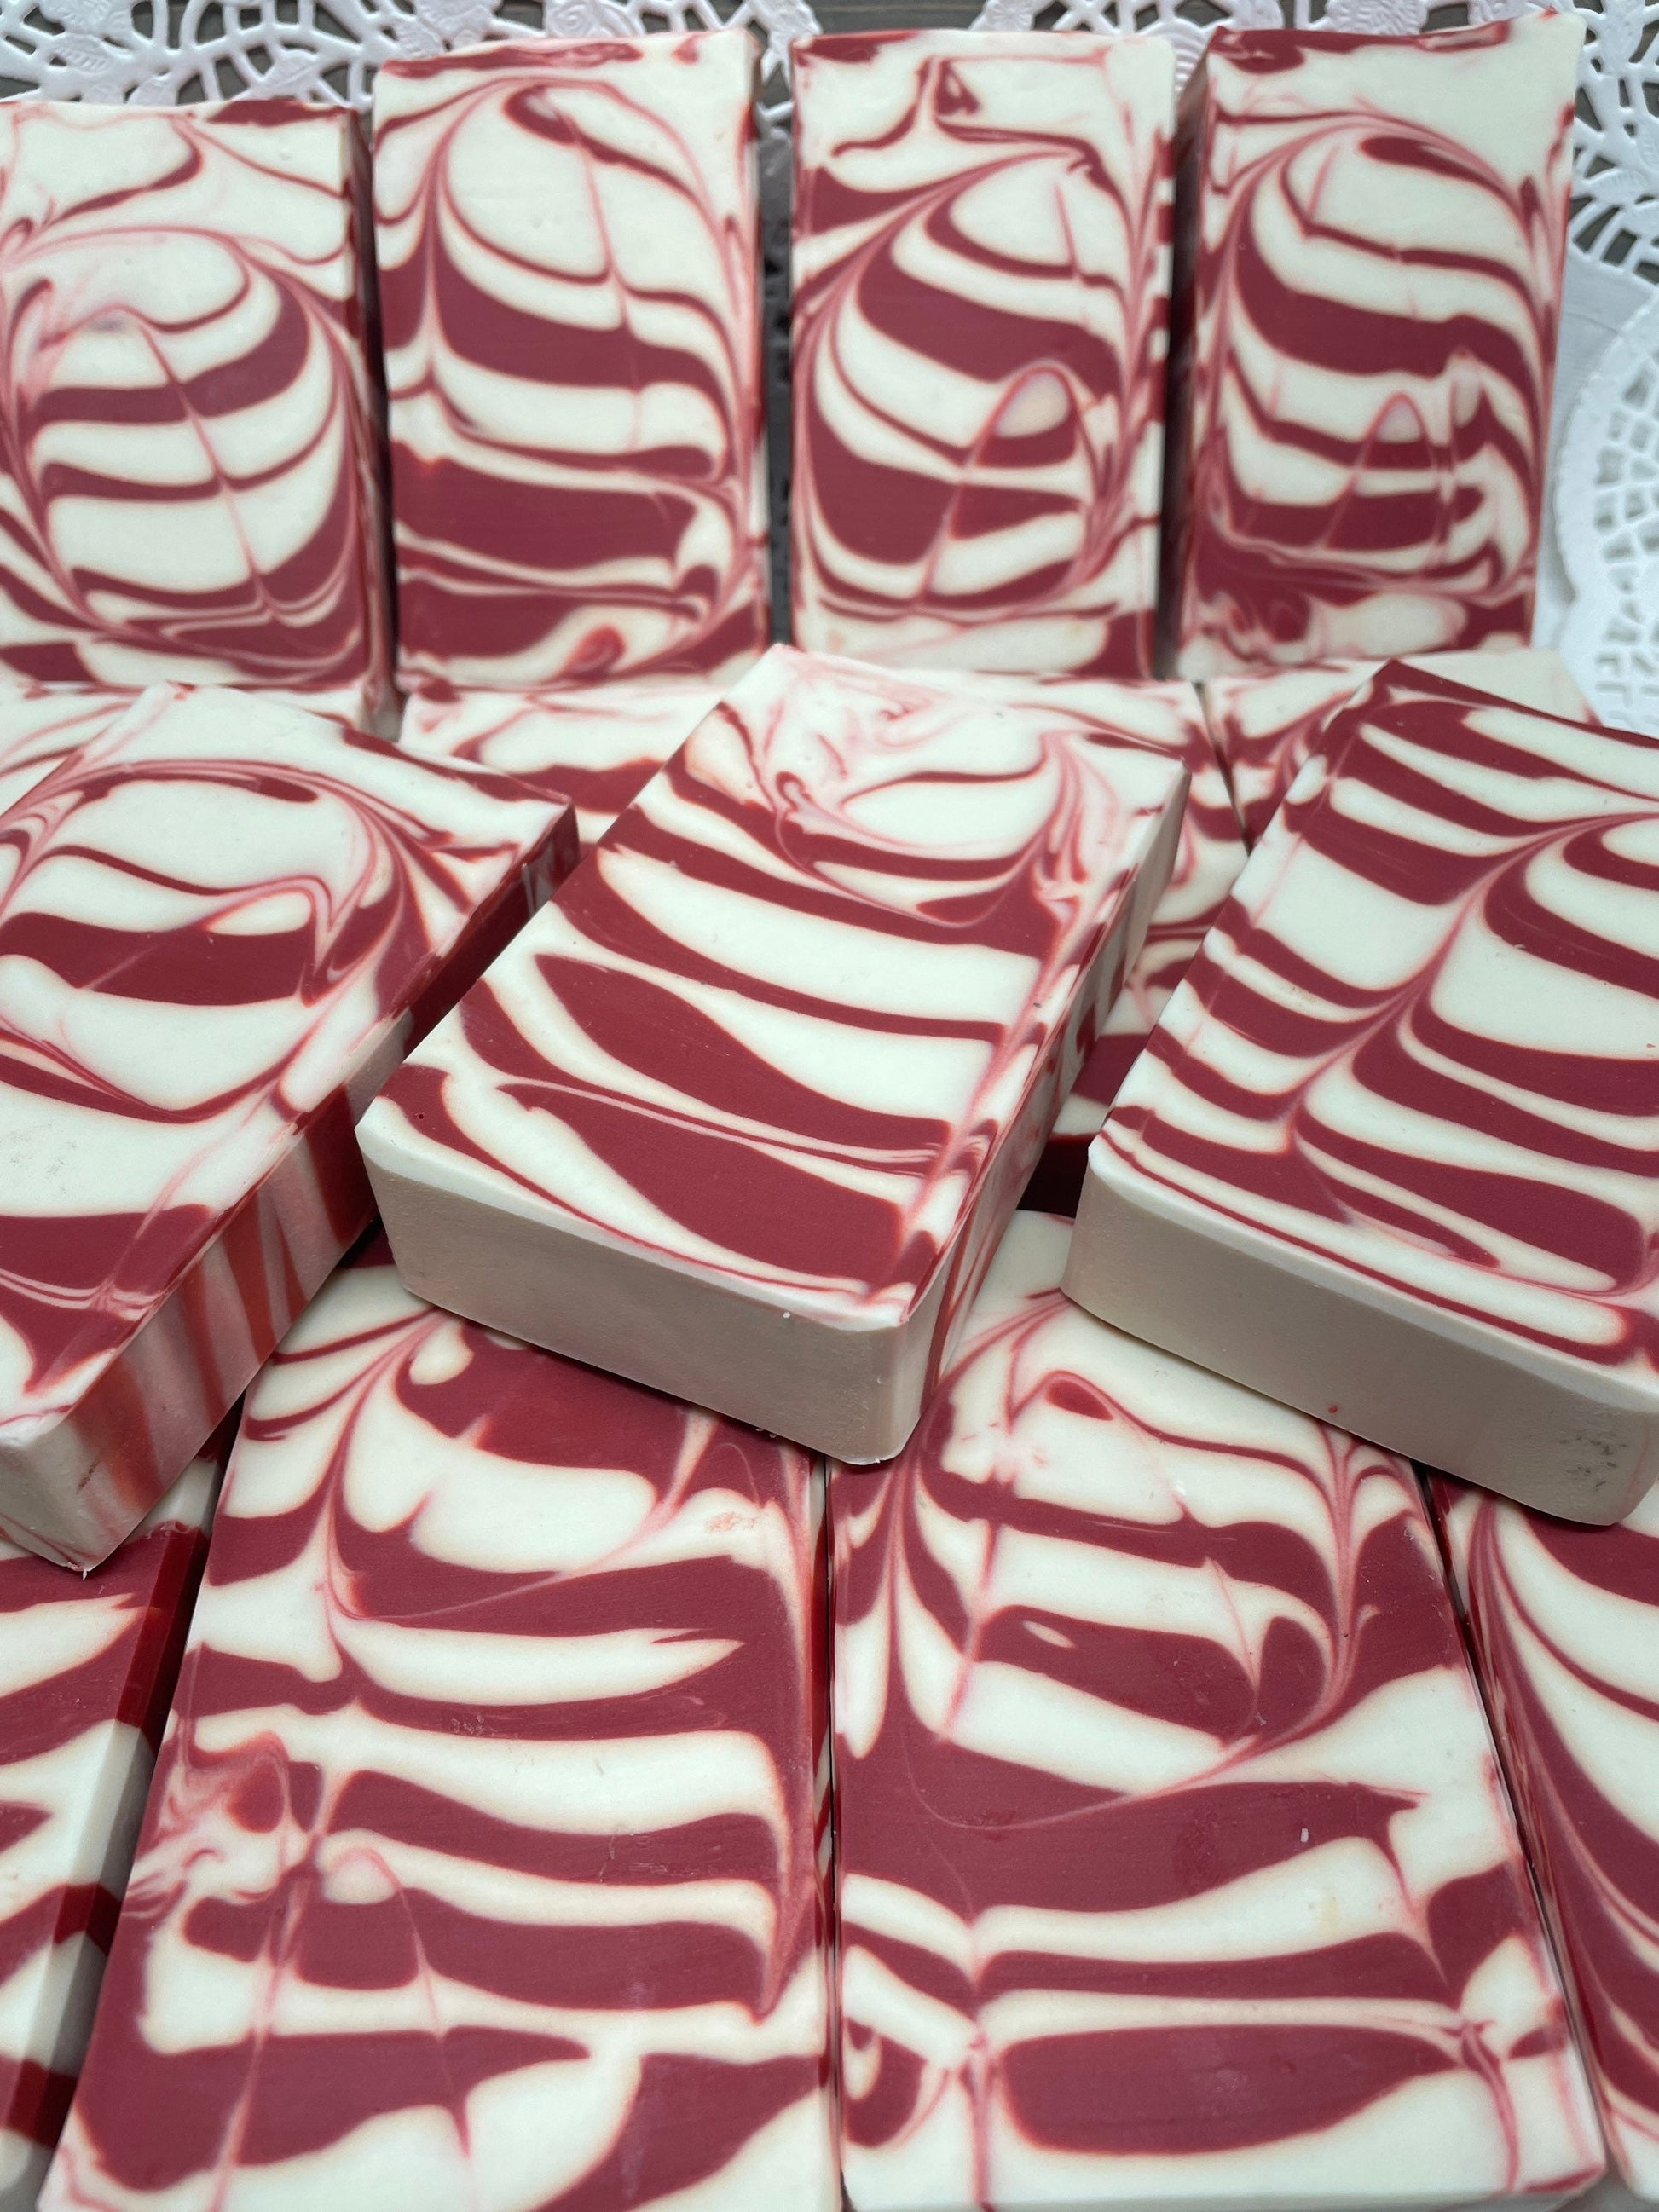 a photo of Candy Cane Soap with Peppermint Essential Oil that is striking red and white striped soap